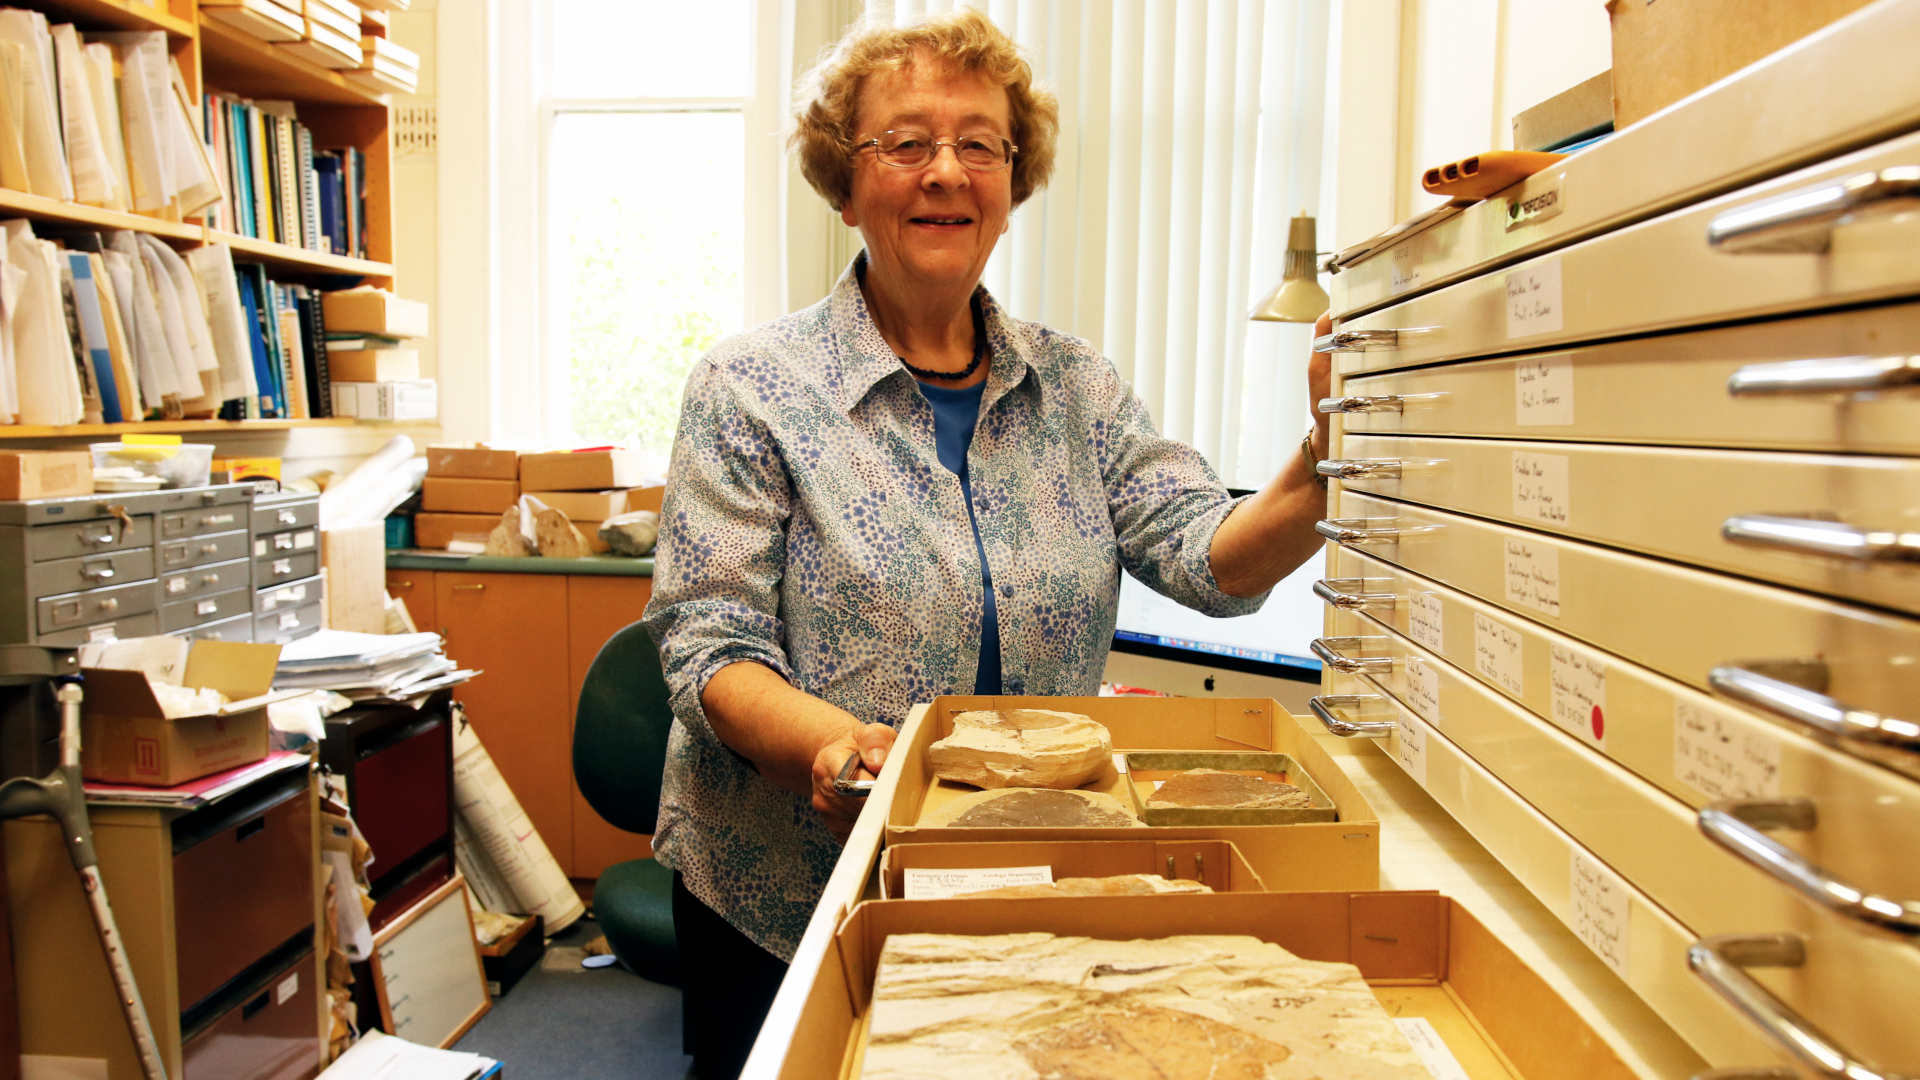 Geologist Daphne Lee, in her office at the University of Otago, has collected drawers full of impressively preserved plant fossils found at Foulden Maar.